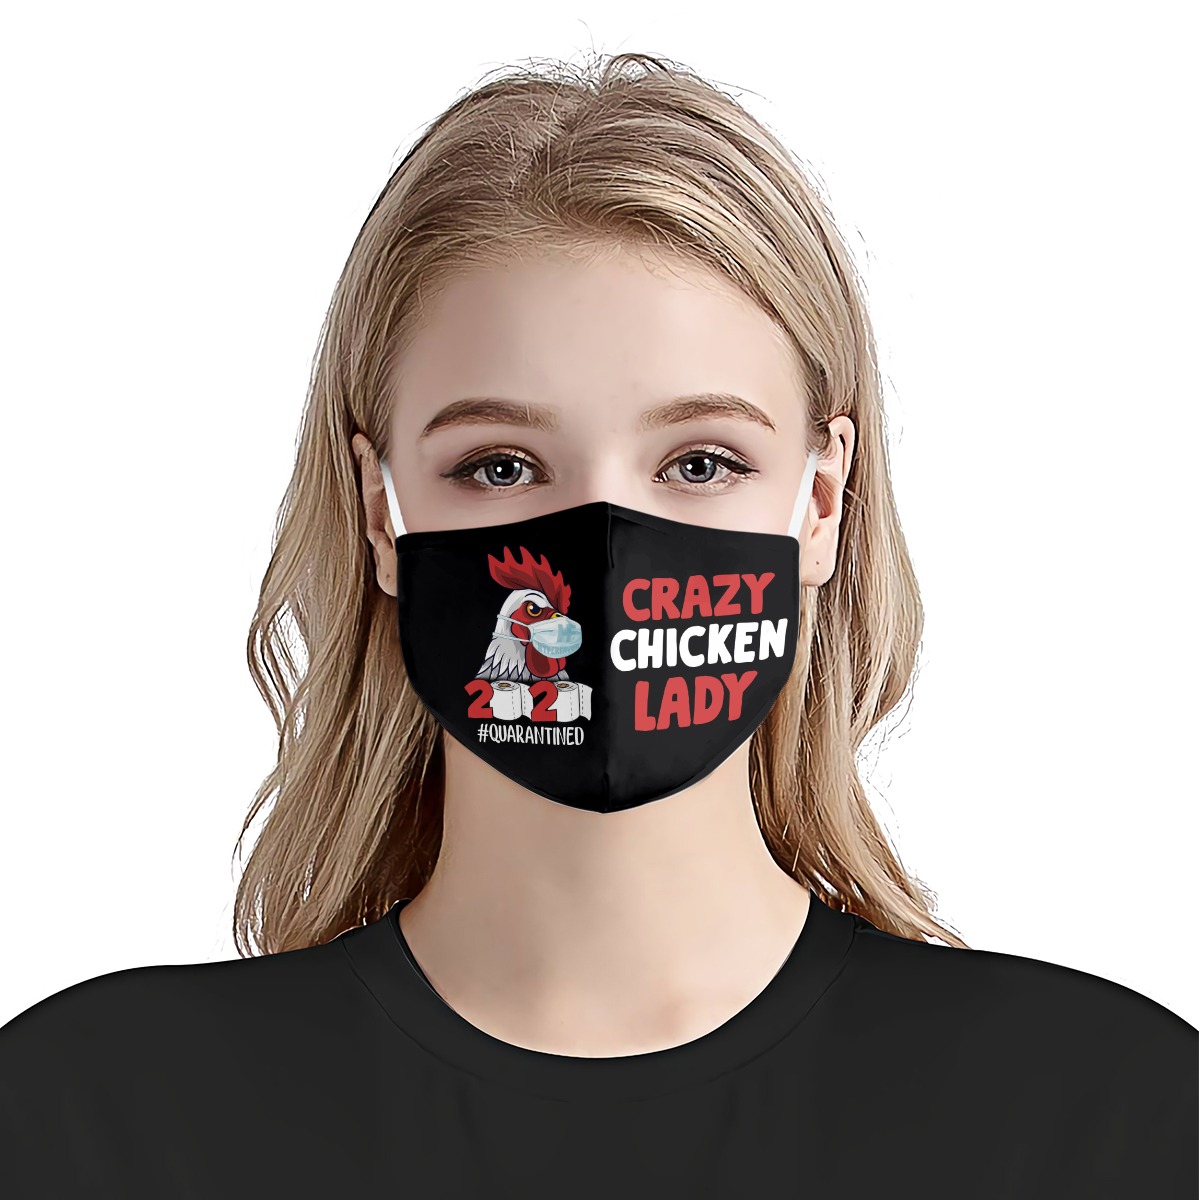 Crazy chicken lady quarantined face mask